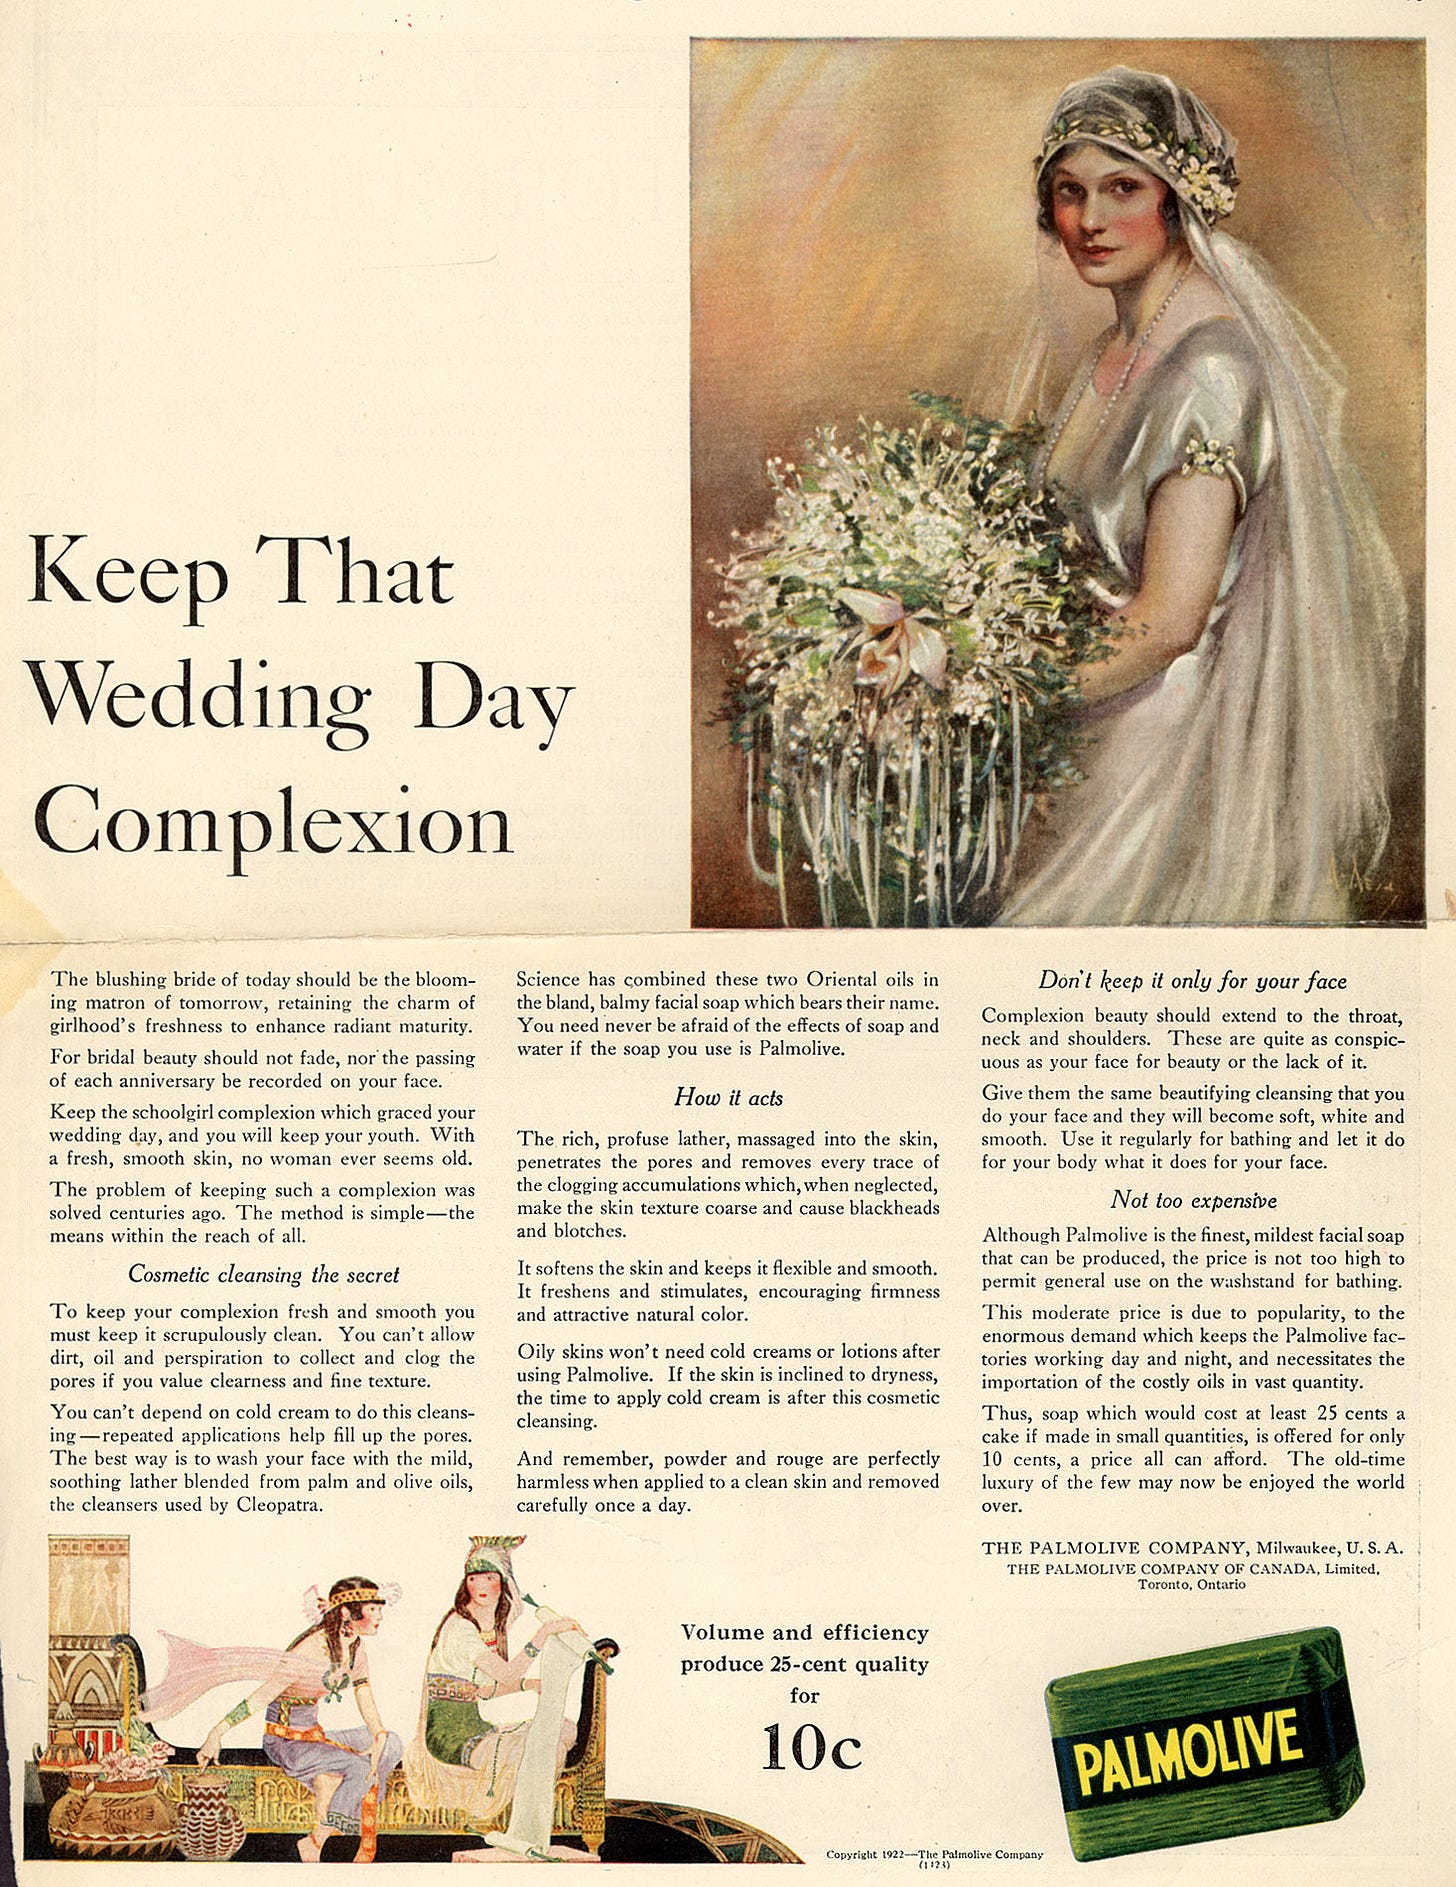 A 1922 magazine advertisement for Palmolive Soap